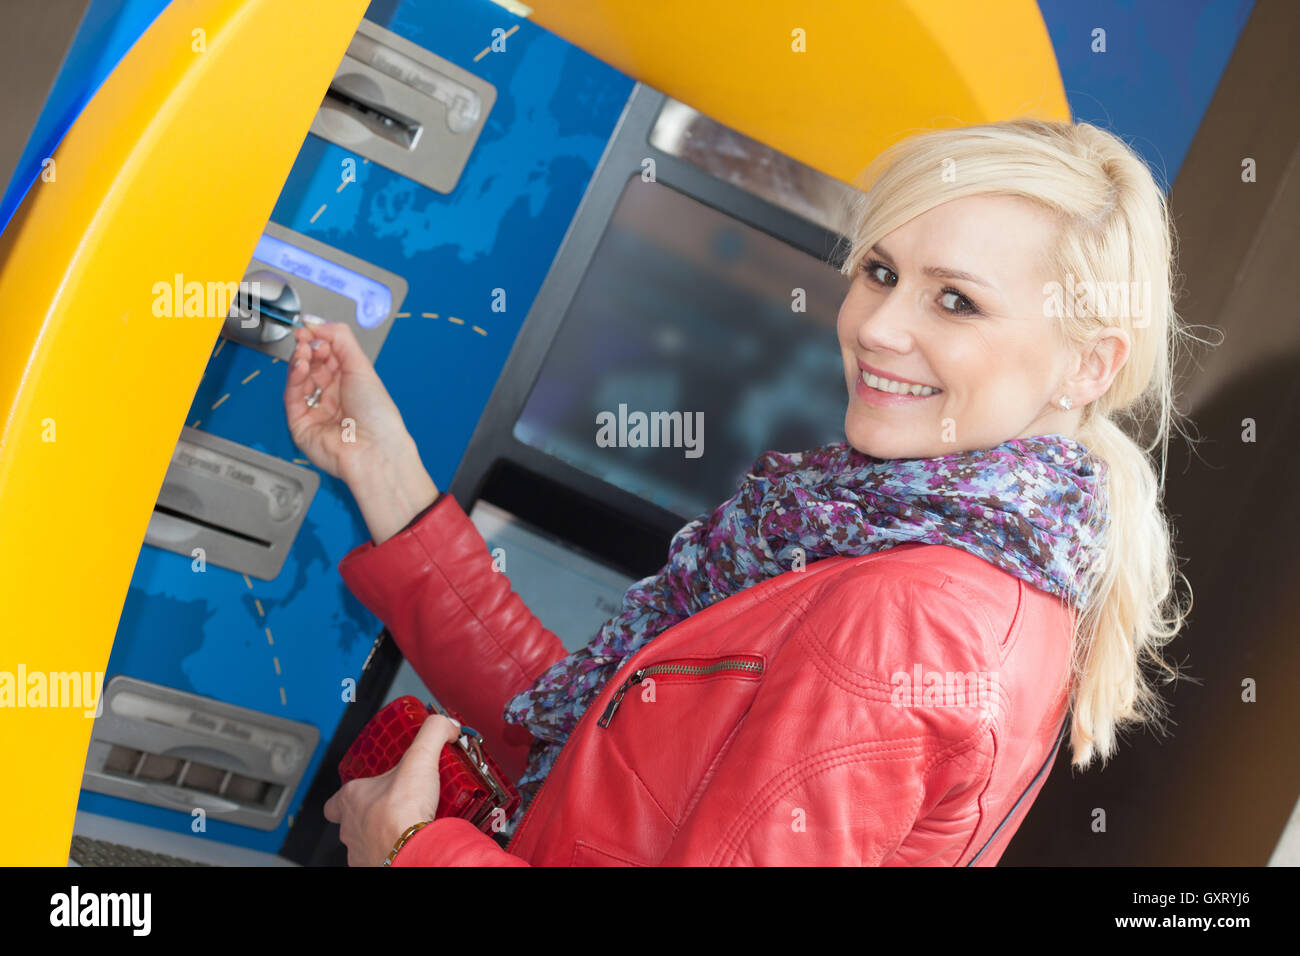 Smiling woman inserting her card in an ATM Stock Photo